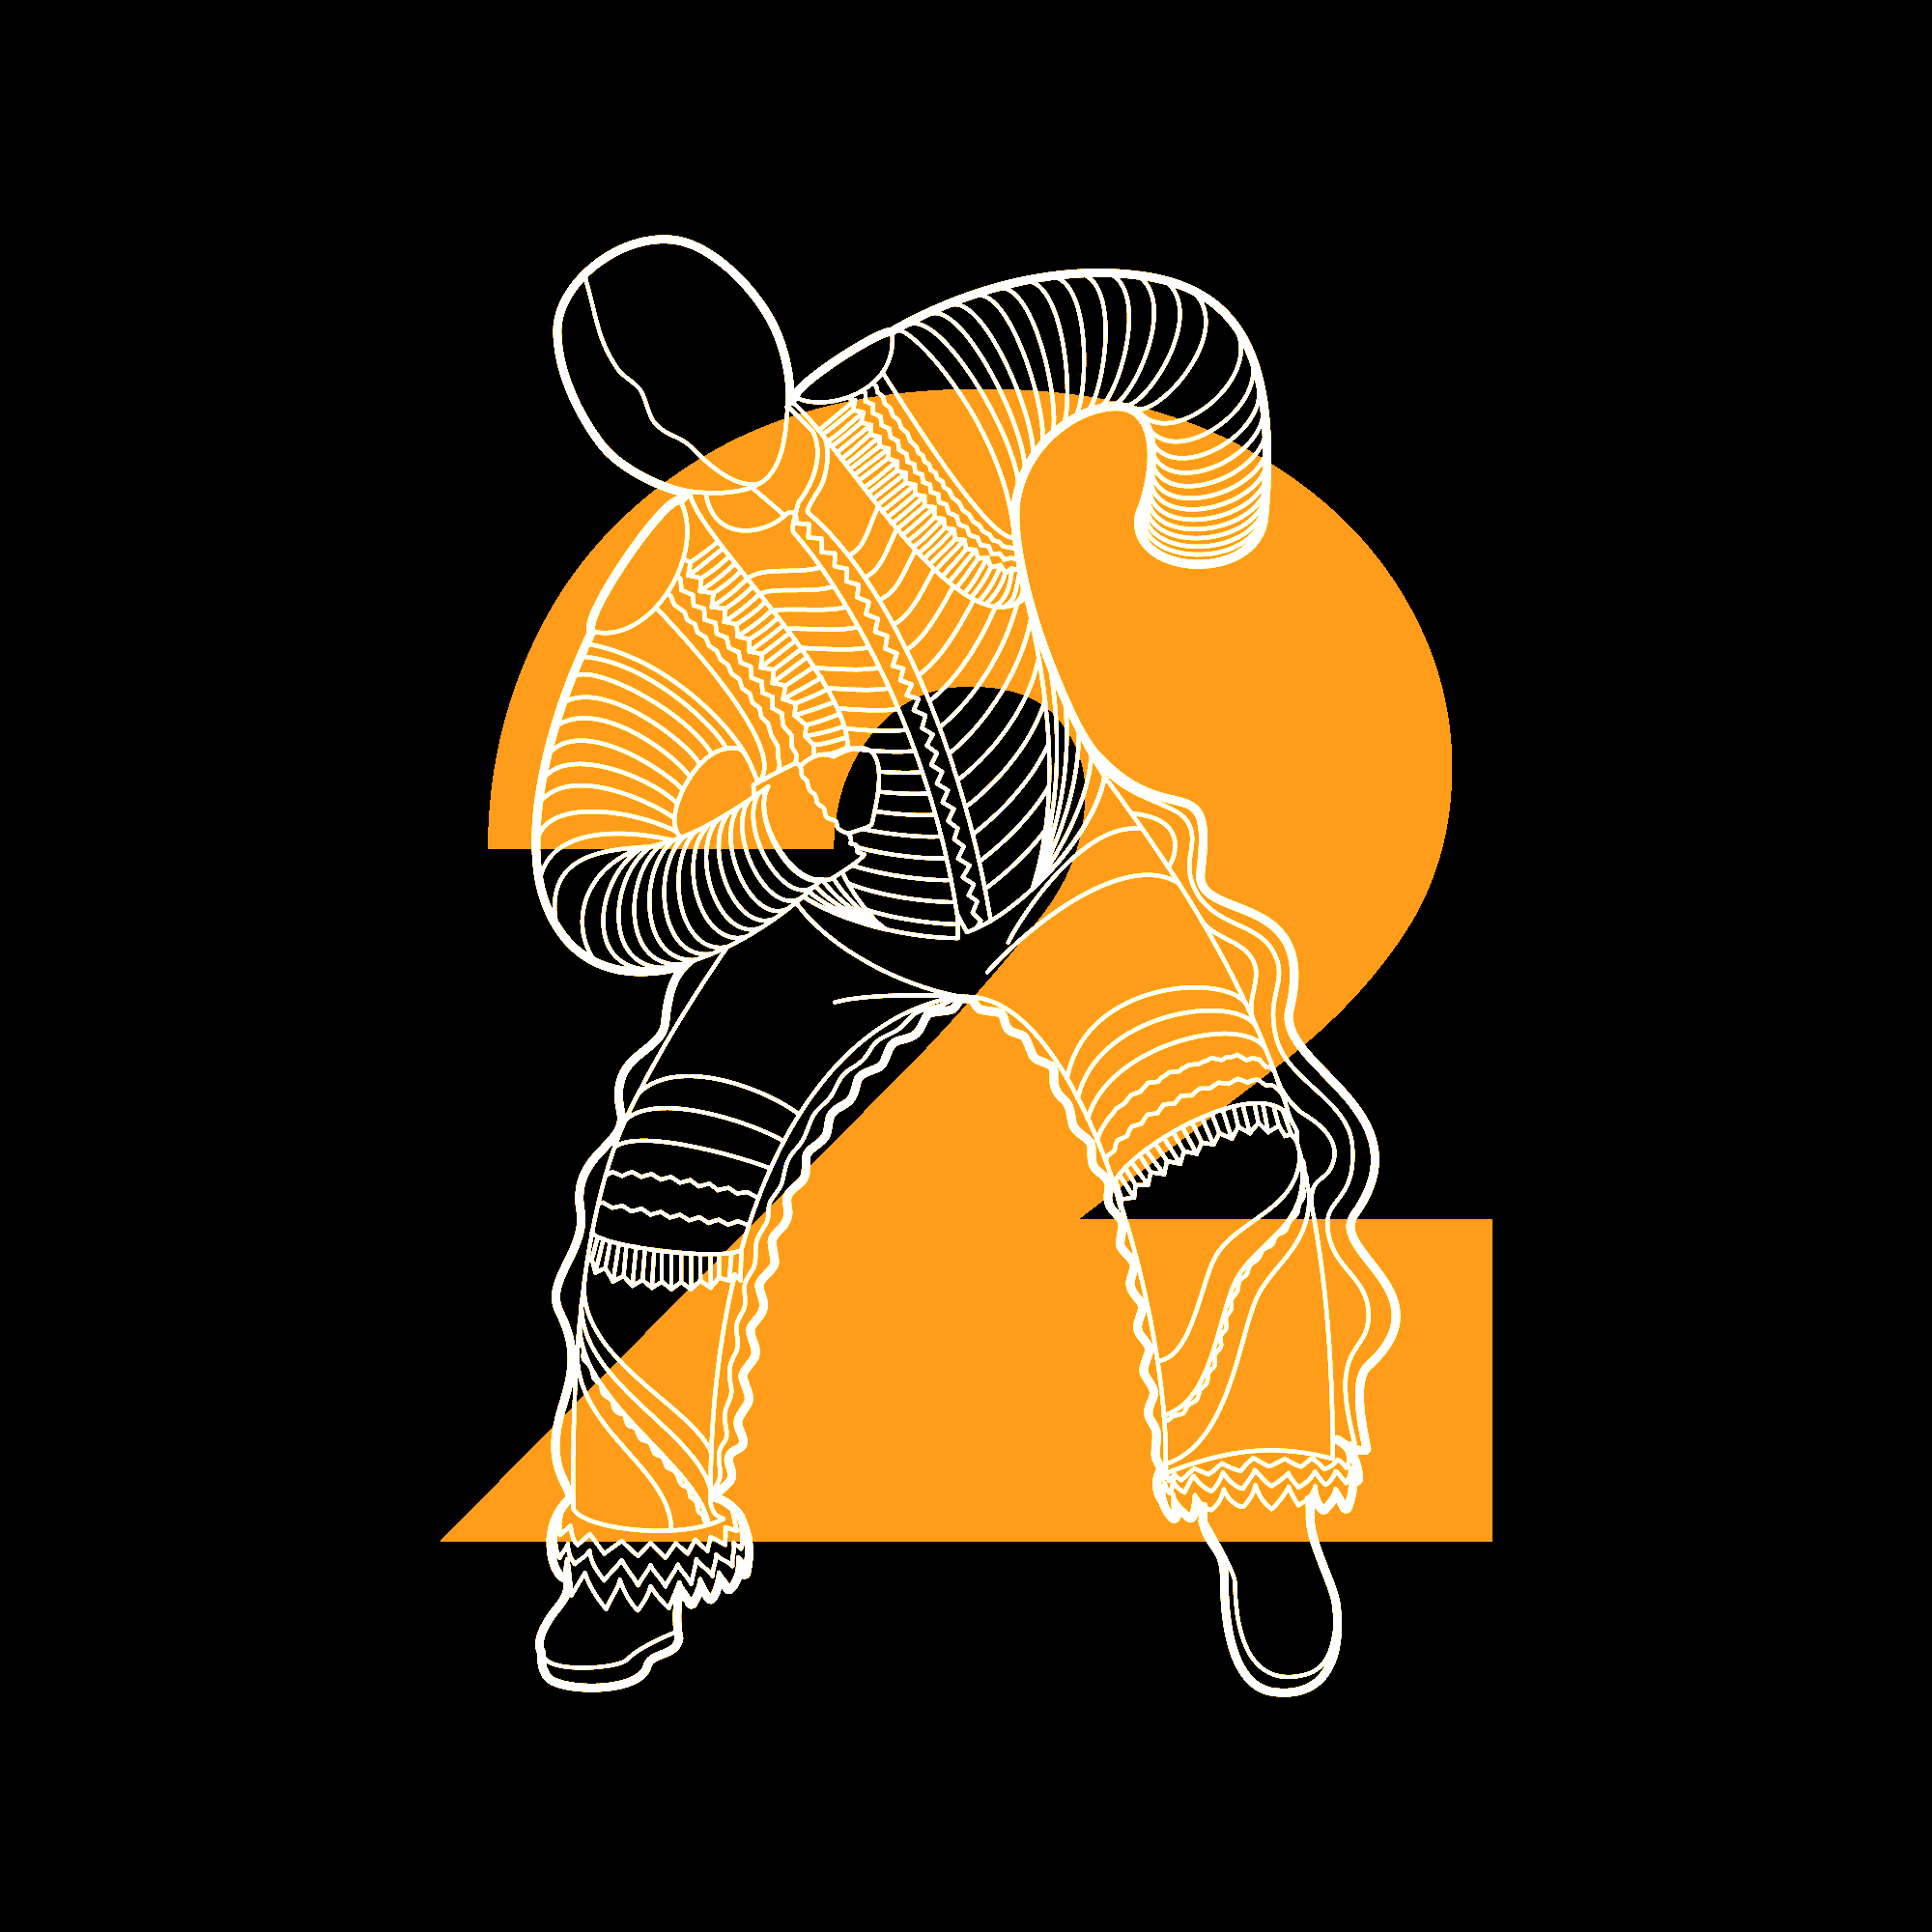 From the Motobi graphic tshirt collection: ornate line art of fancy dress motobi dancer from Ghana, throwing shapes. Labelled: '2'.